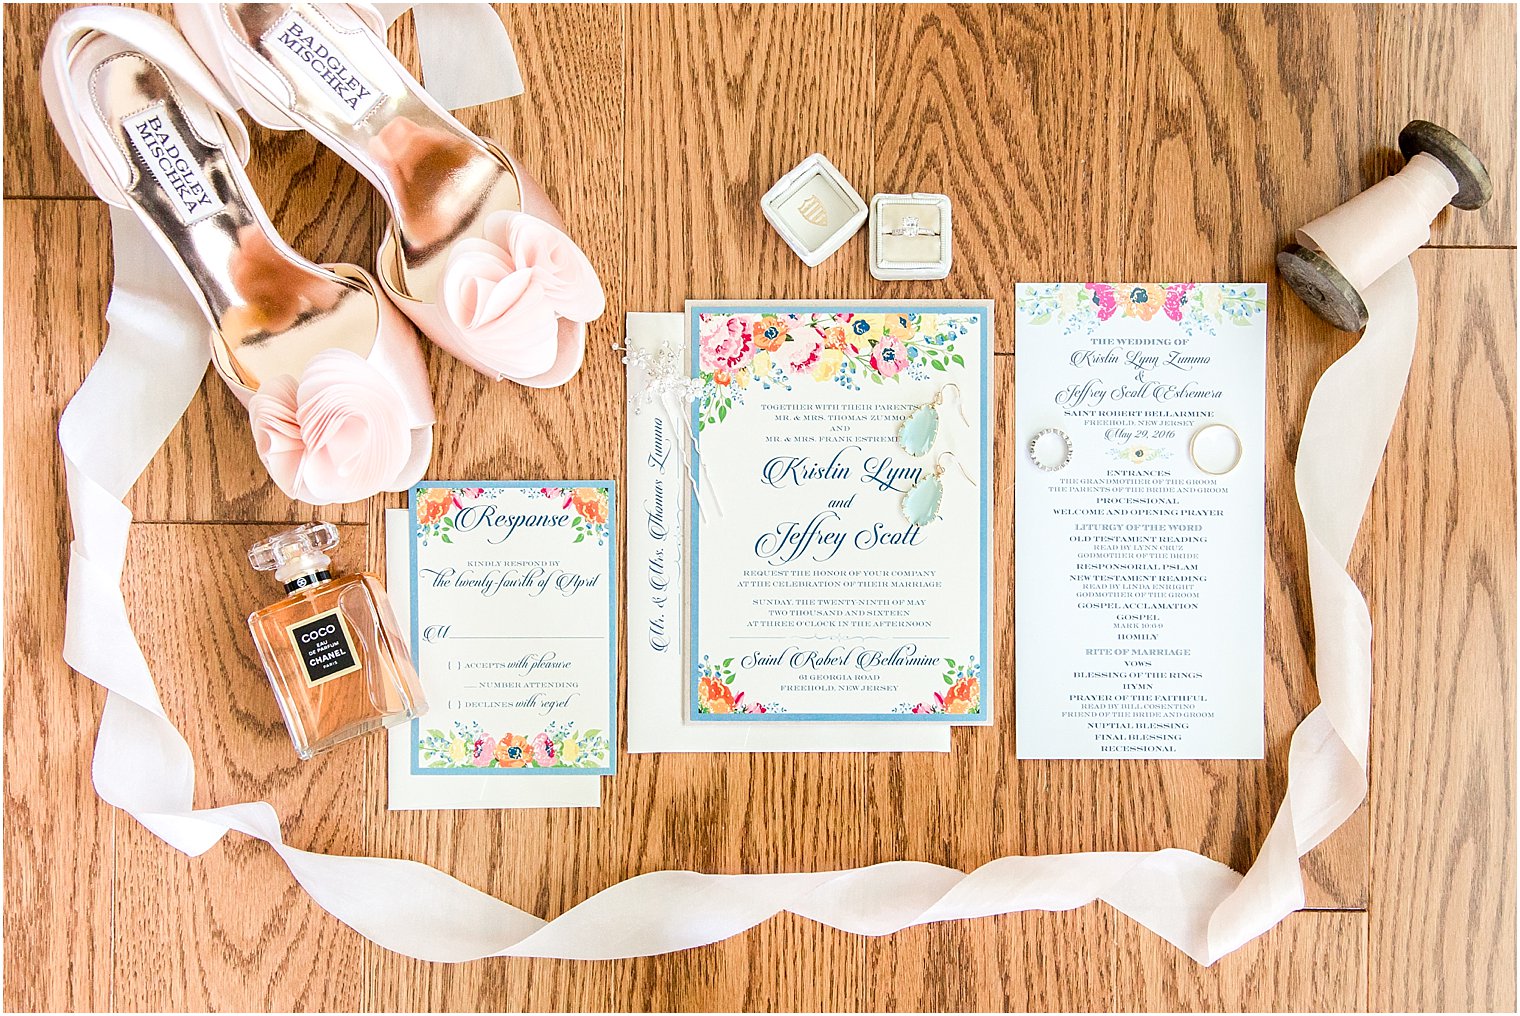 Invitations by Holland Designs